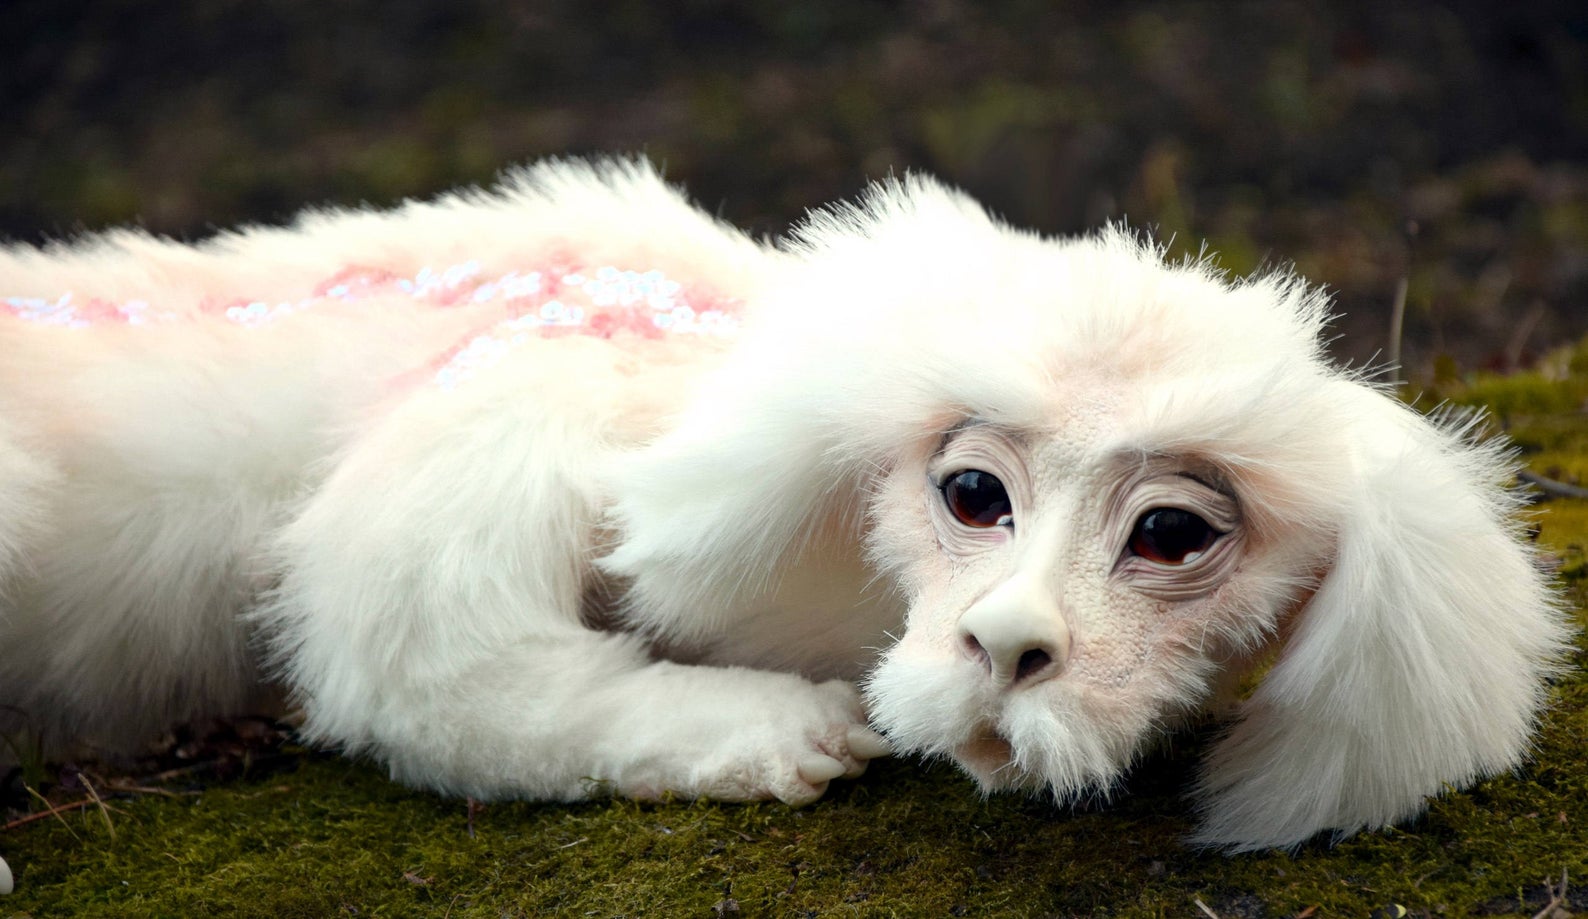 You Can Get A Falkor The Luck Dragon From ‘The Neverending Story’ That Looks Incredibly Realistic